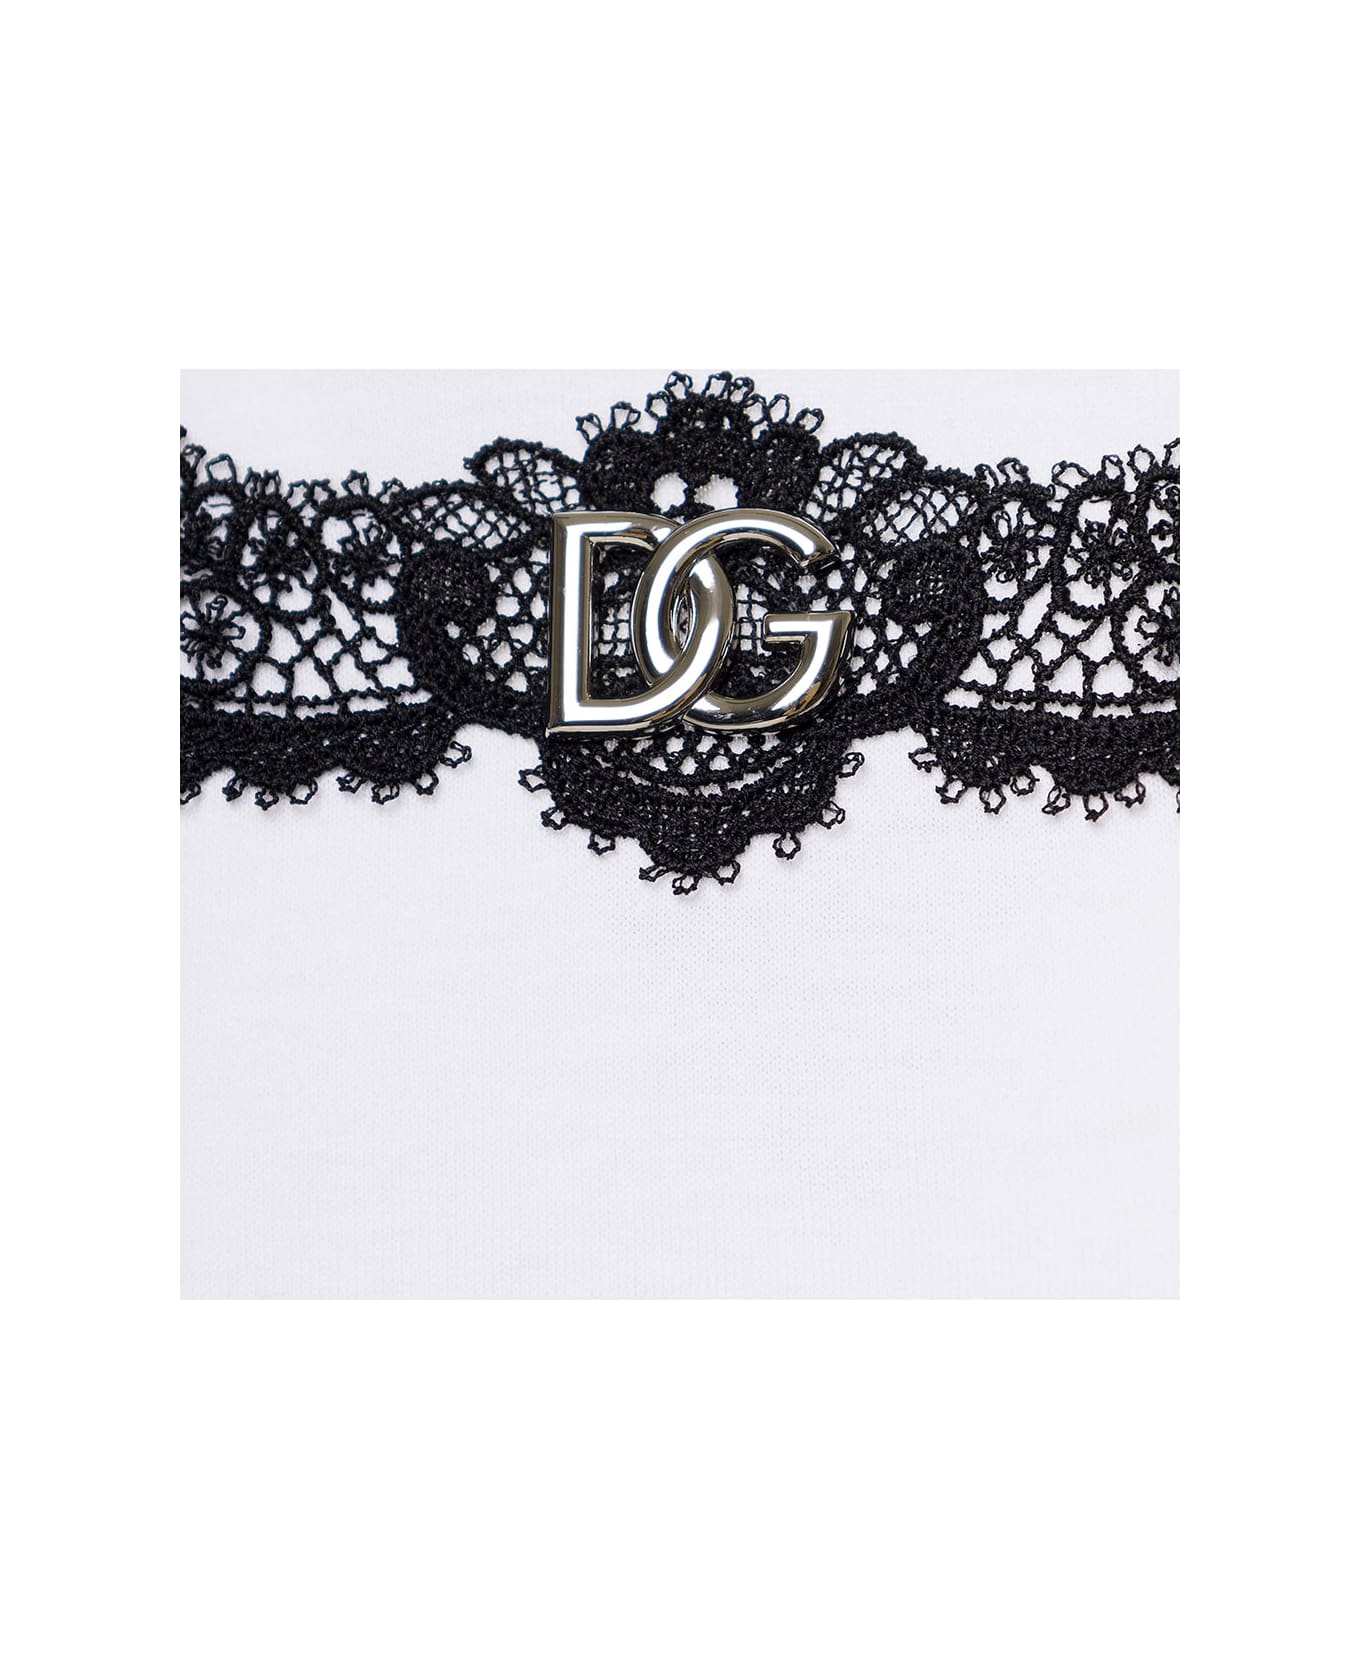 Dolce & Gabbana White Crewneck T-shirt With Lace Inserts And Dg Logo In Cotton Woman - White